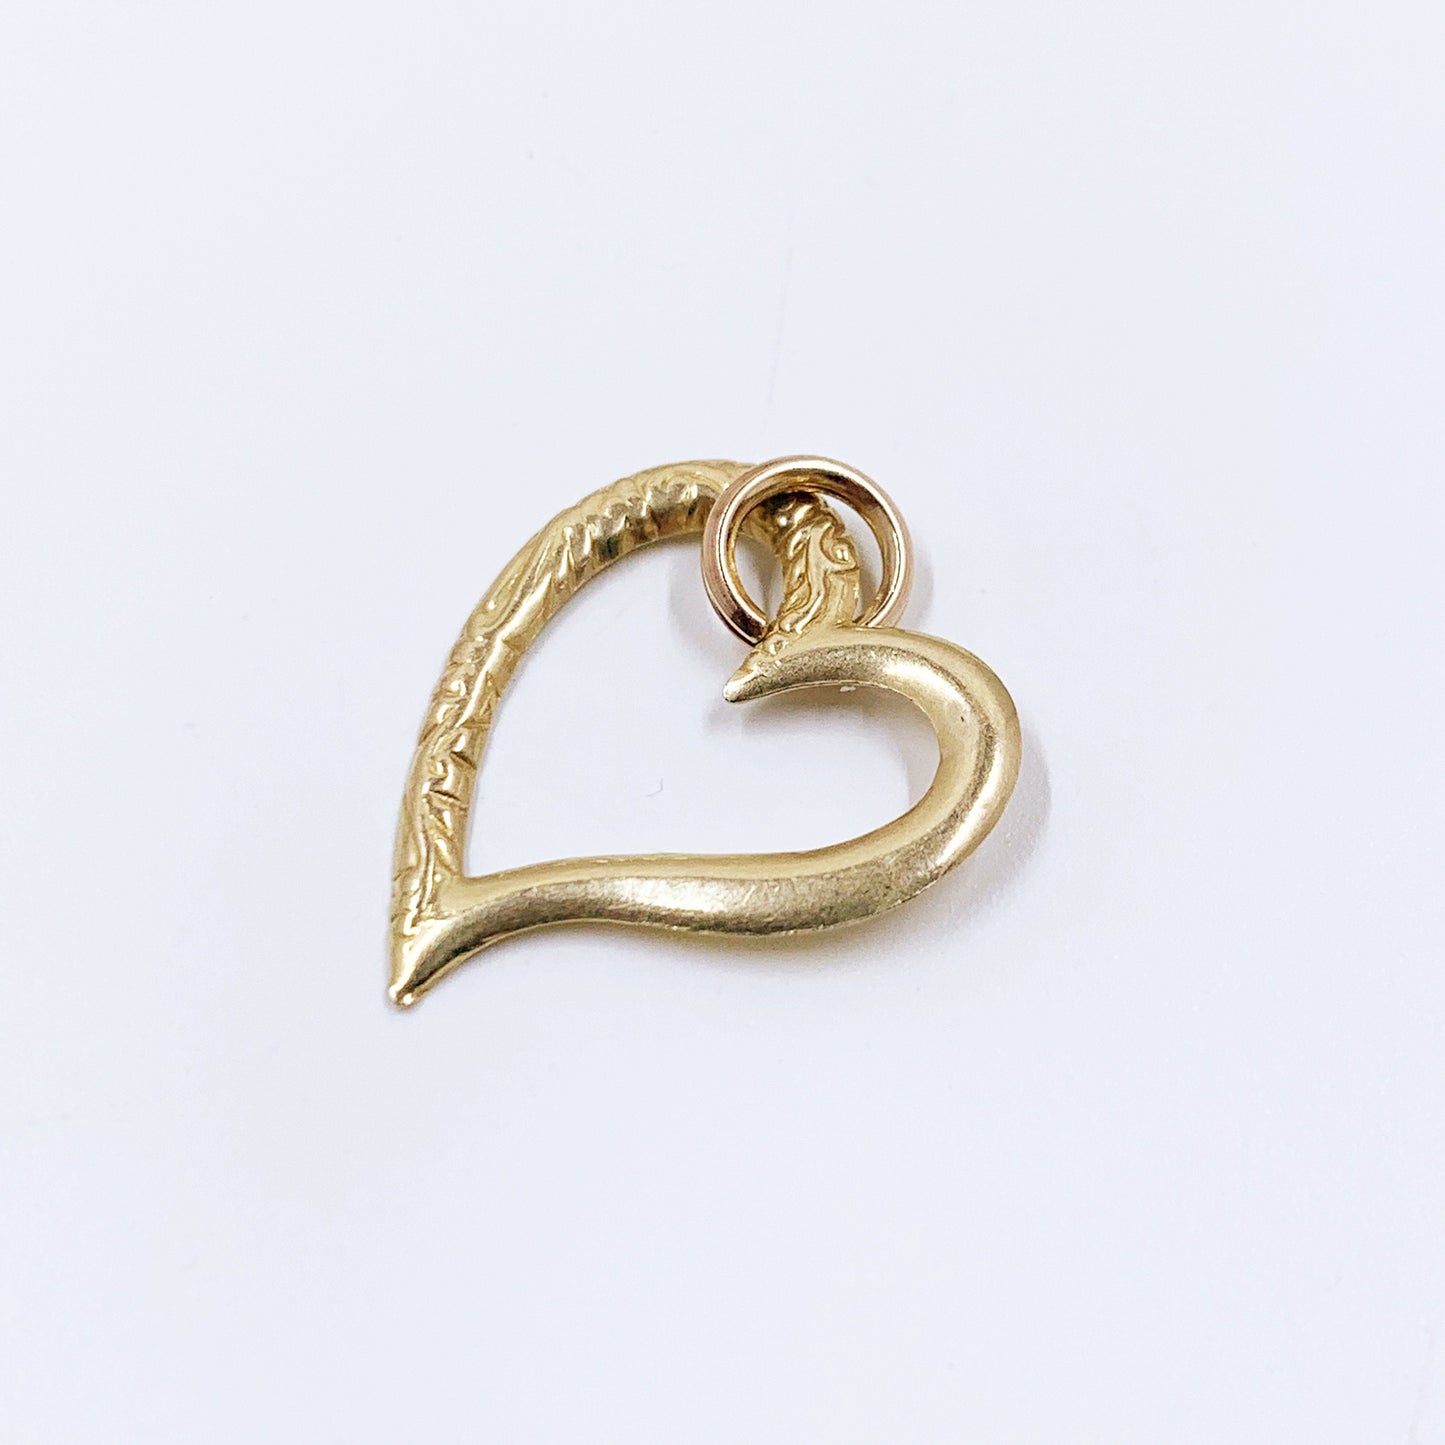 Vintage 14K Repousse Witch's Heart Charm | 14K Yellow Flat Heart Charm | 14K Open Heart Charm